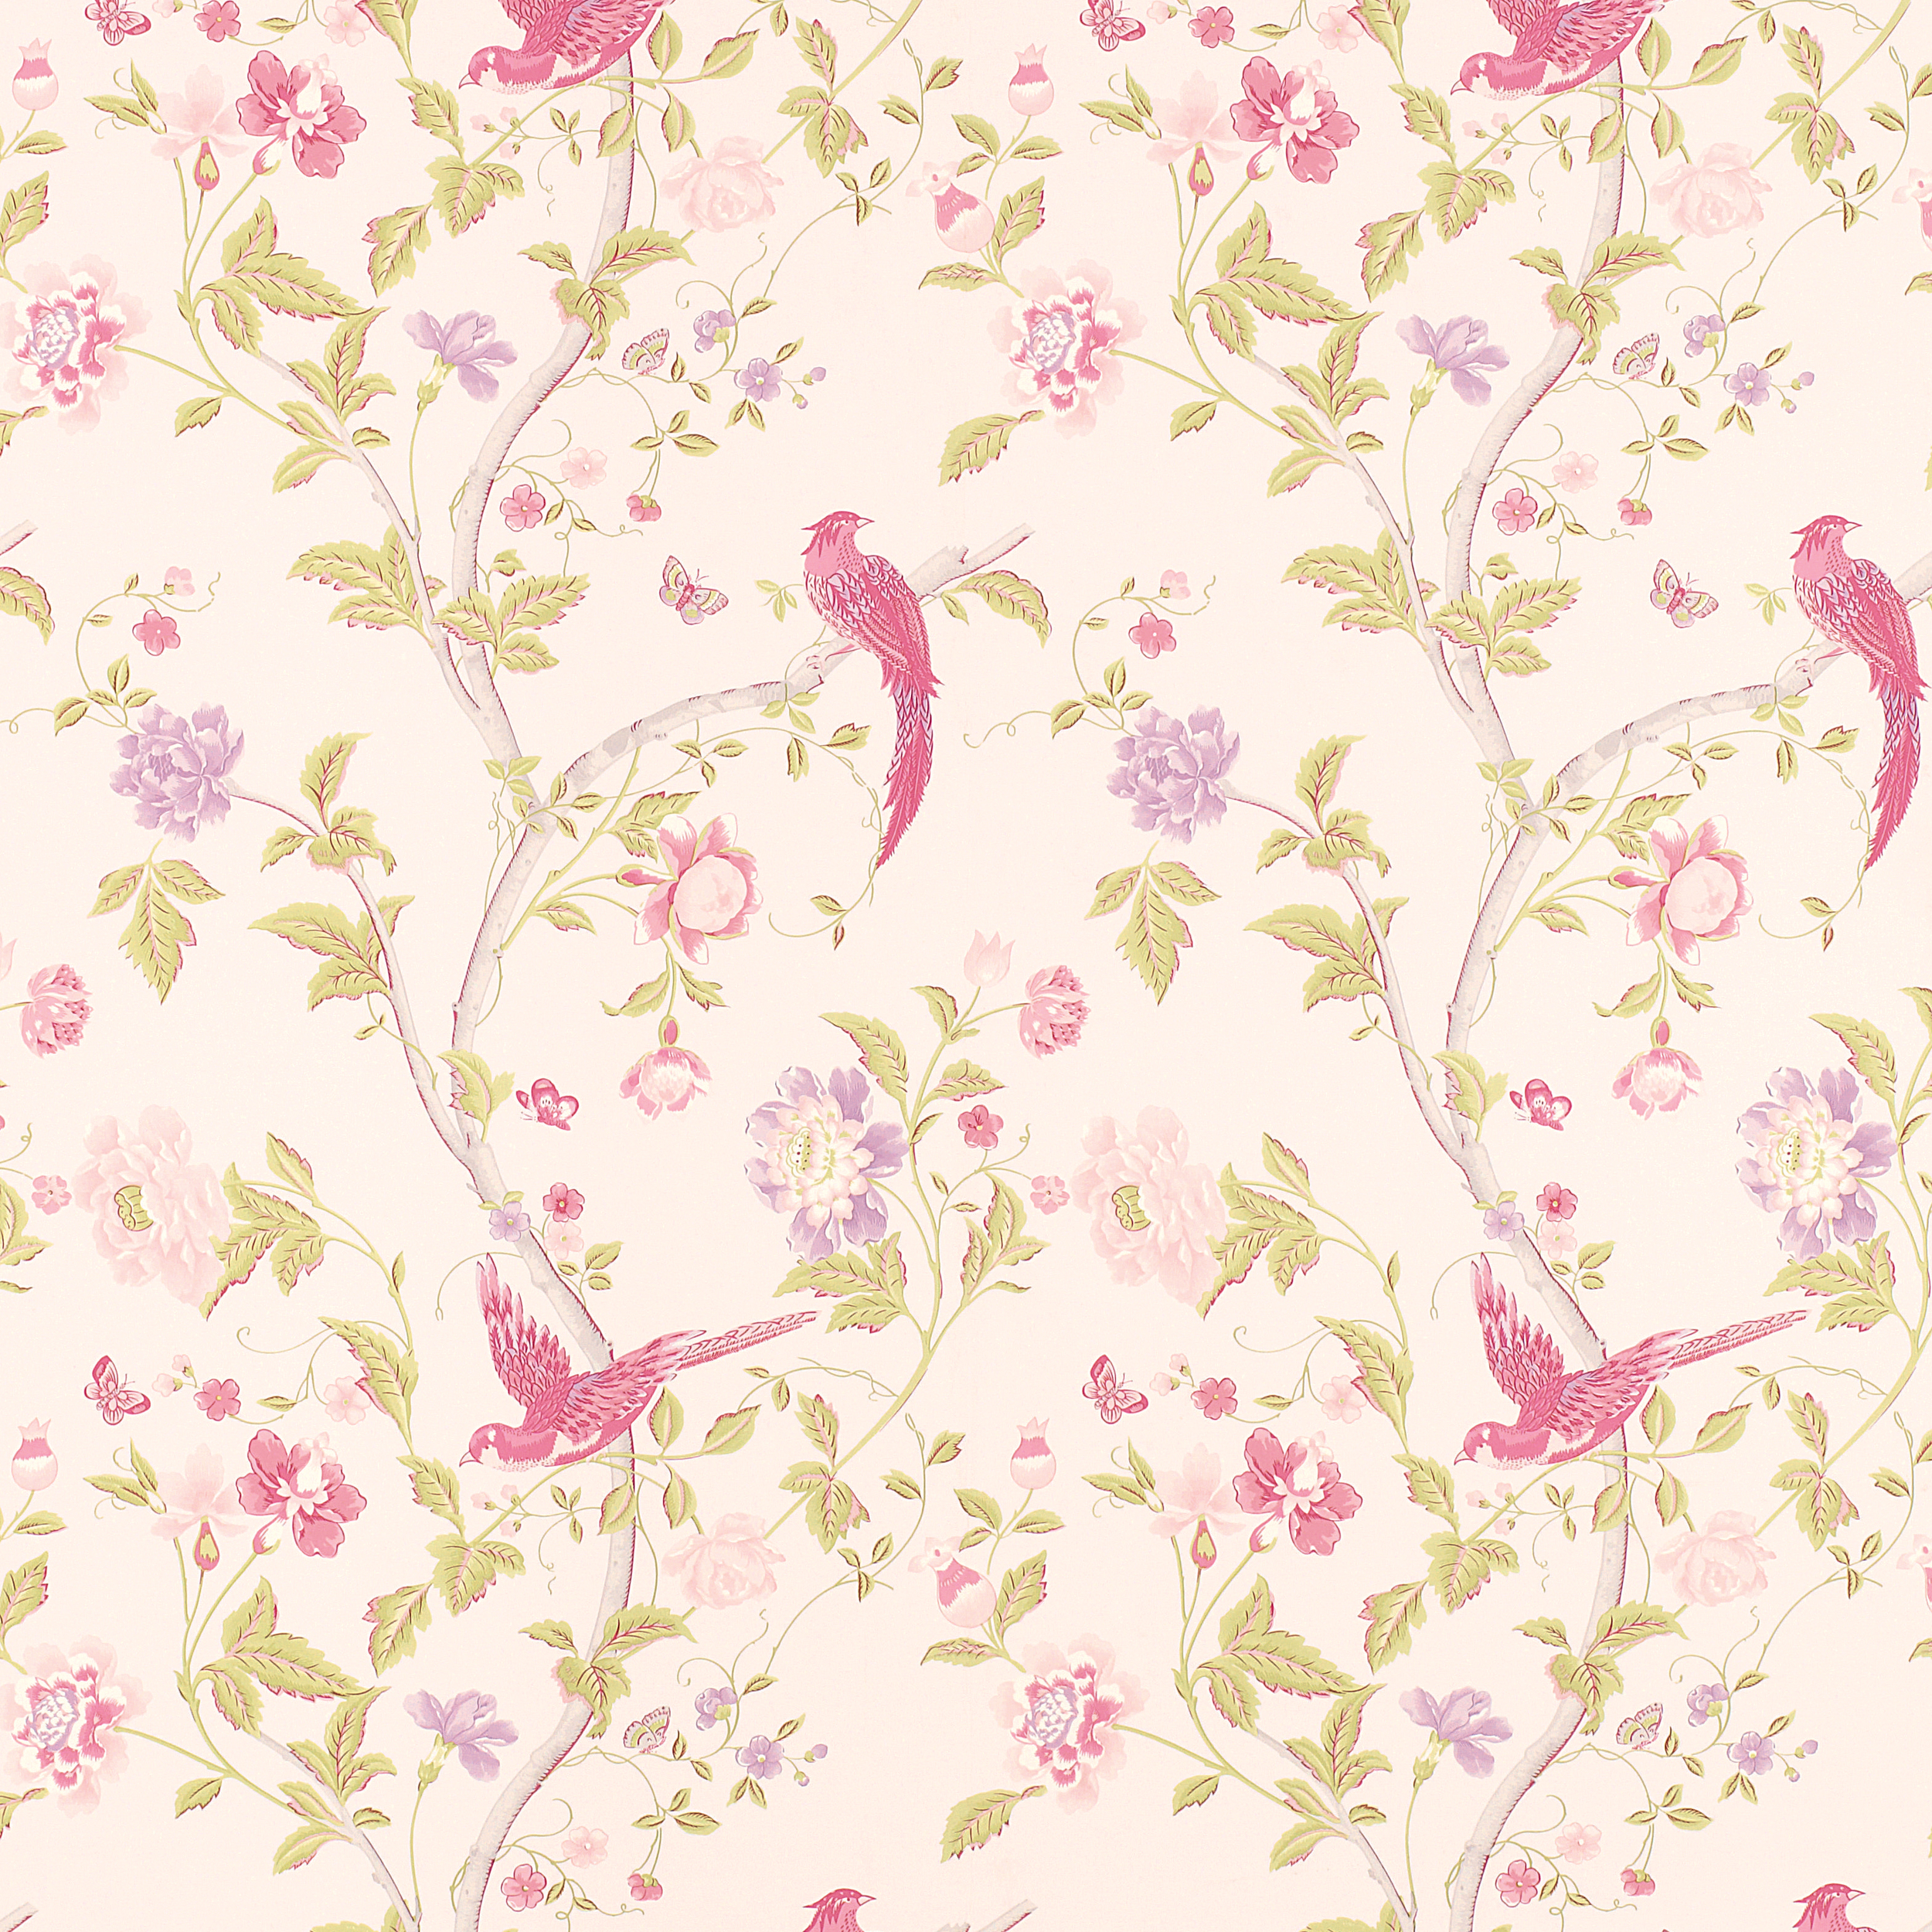 Home Decorating Wallpaper Summer Palace Cerise Floral